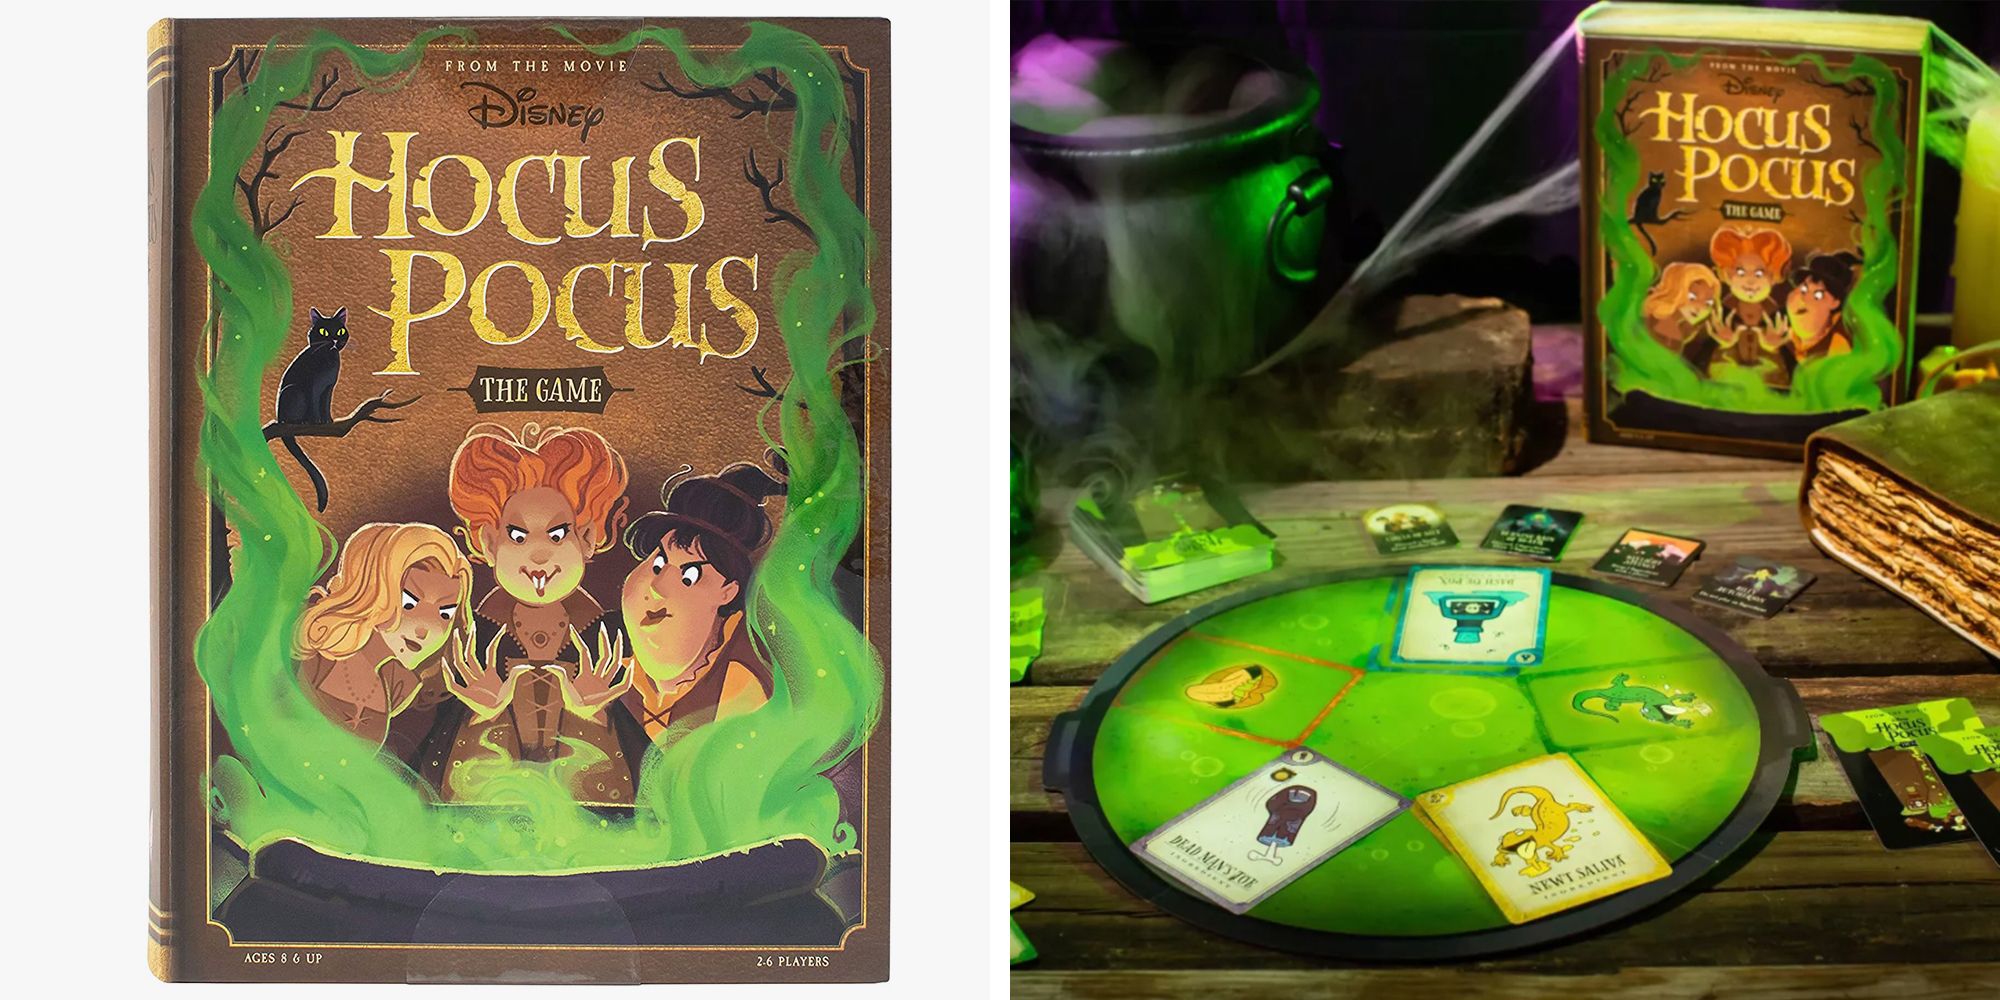 Disney Has Created a 'Hocus Pocus' Game to Play With Your Fellow 